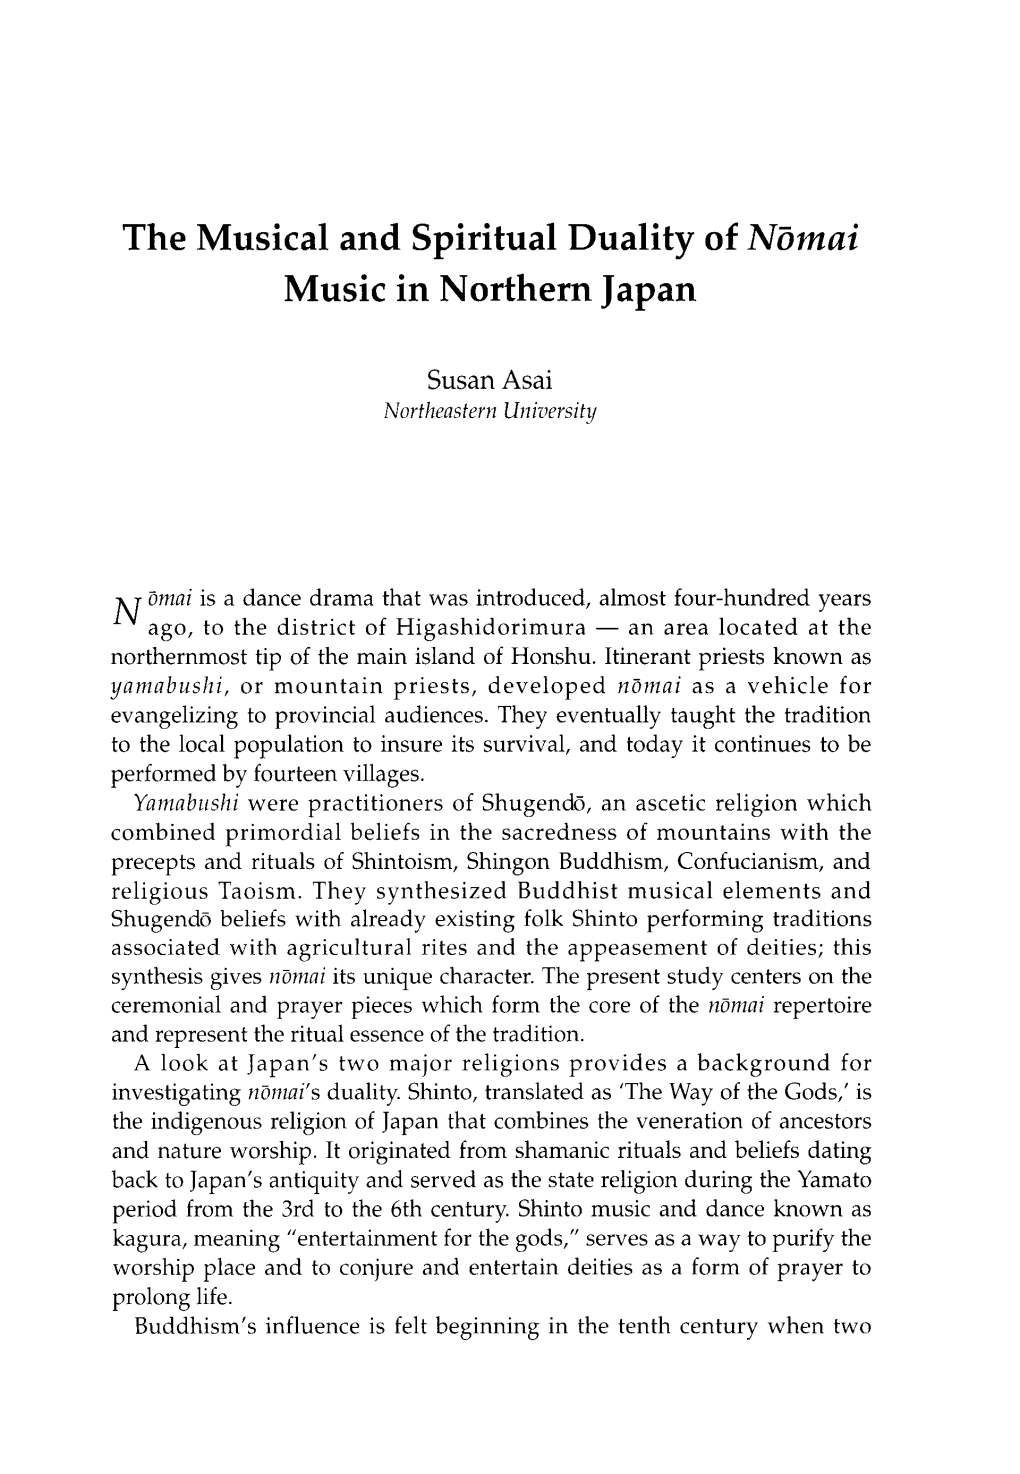 The Musical and Spiritual Duality of Nomai Music in Northern Japan